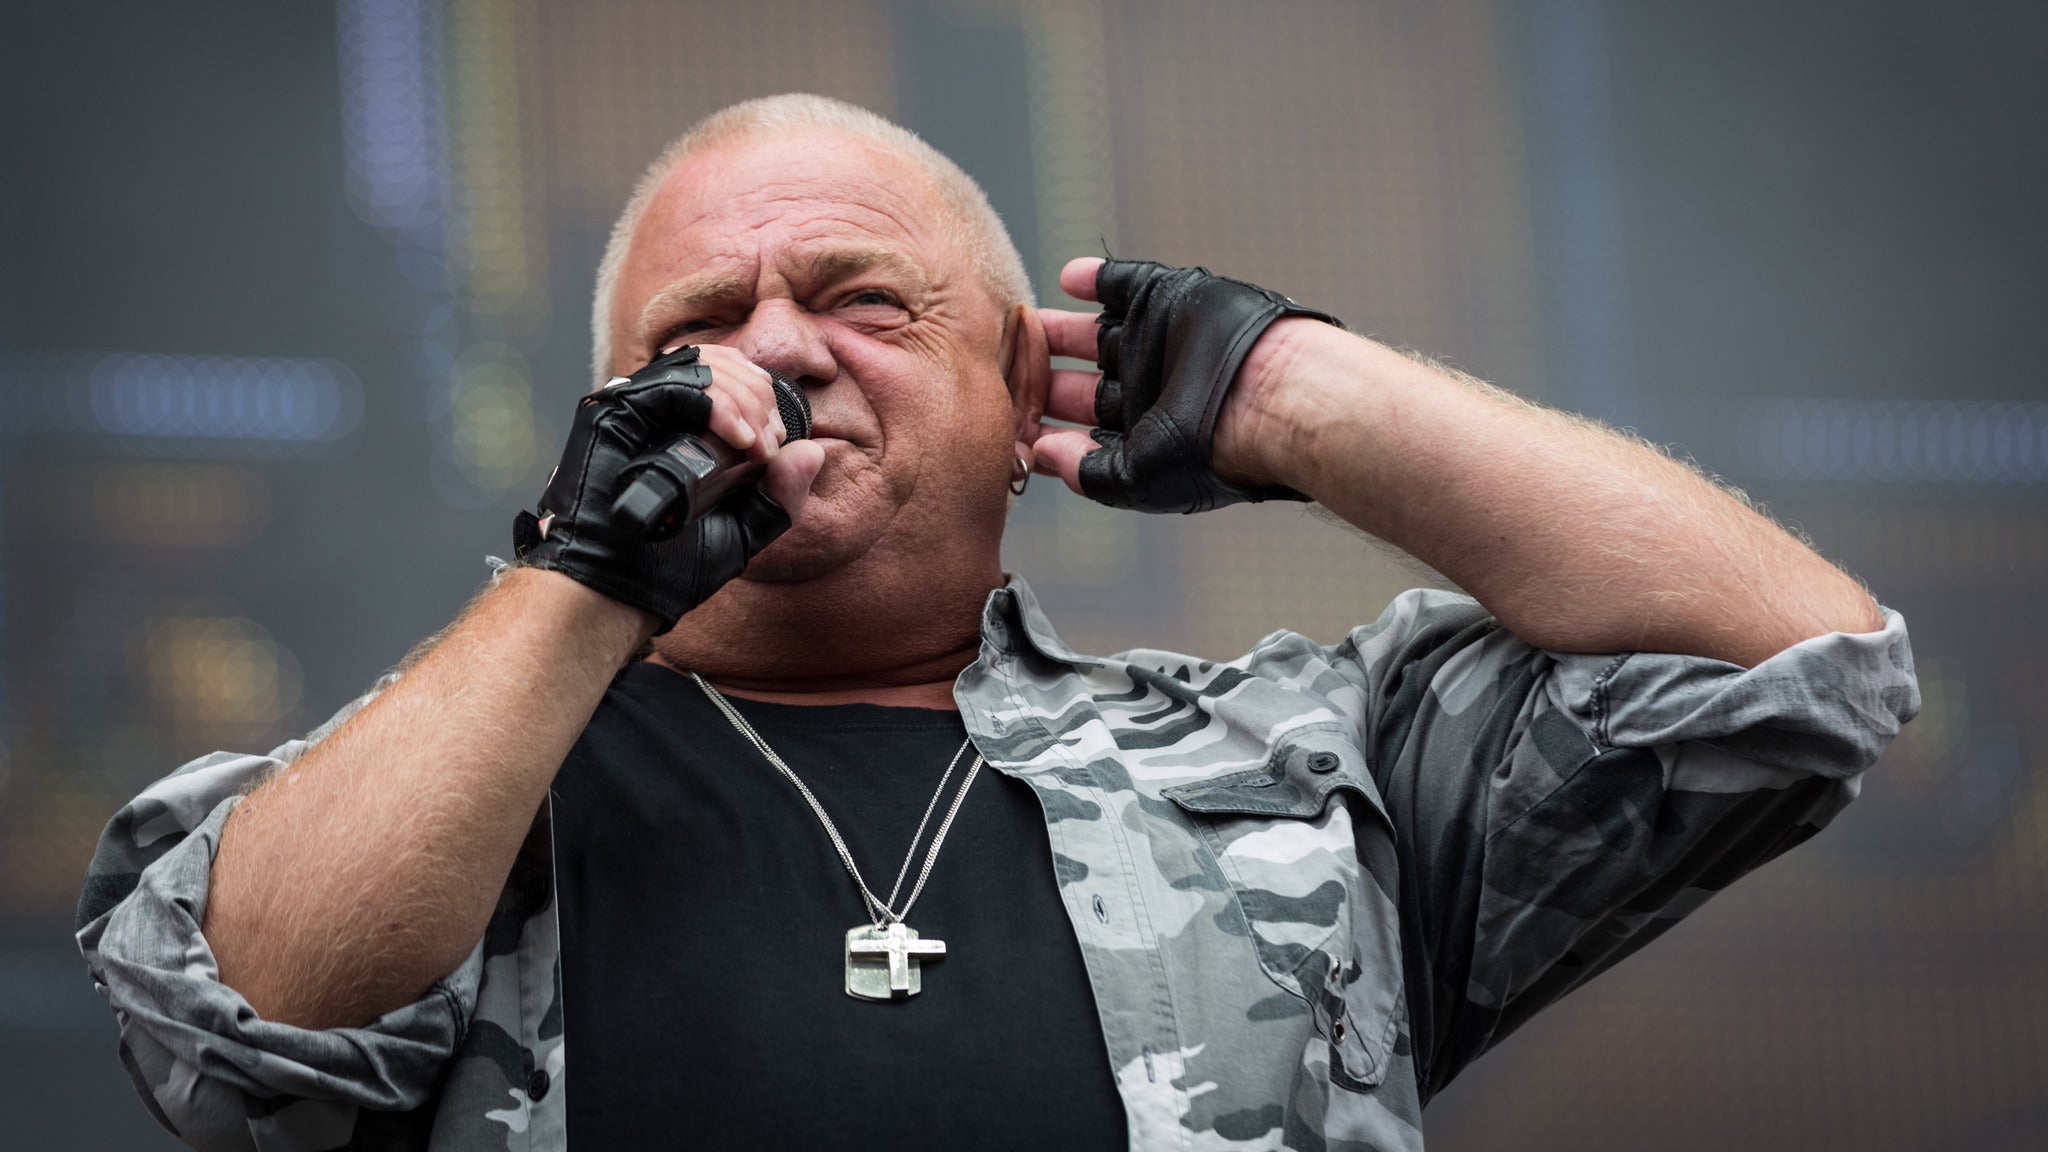 DIRKSCHNEIDER - Back To The Roots Part II in Asbury Park promo photo for Music Geeks presale offer code